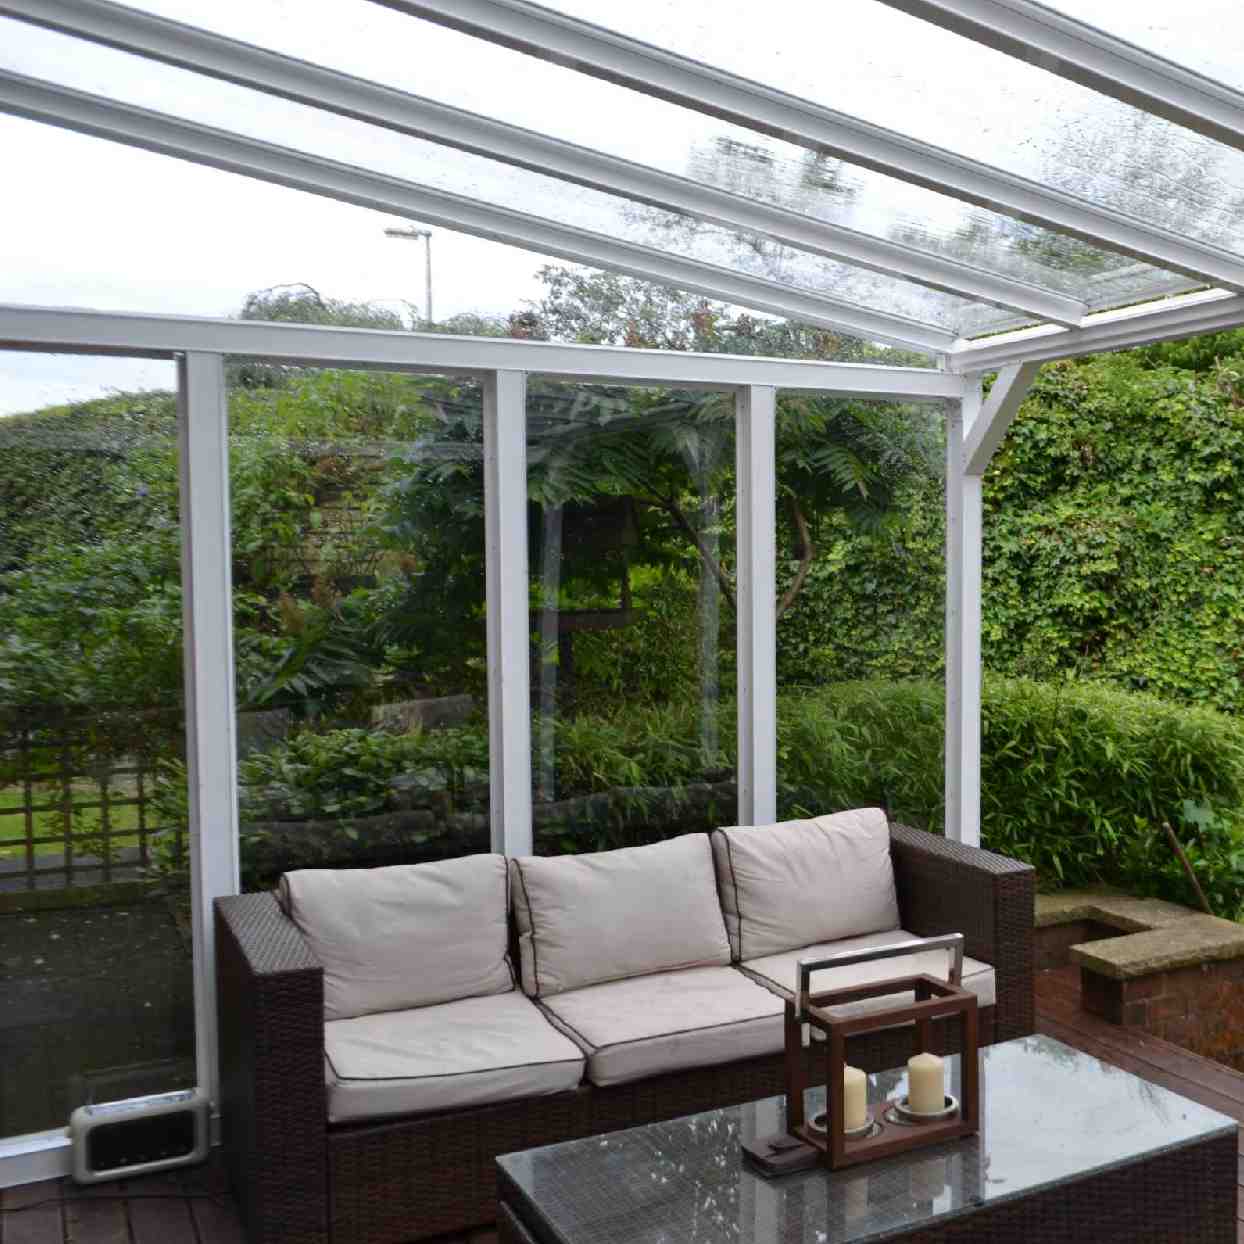 Buy Omega Verandah White with 16mm Polycarbonate Glazing - 6.3m (W) x 3.0m (P), (4) Supporting Posts online today